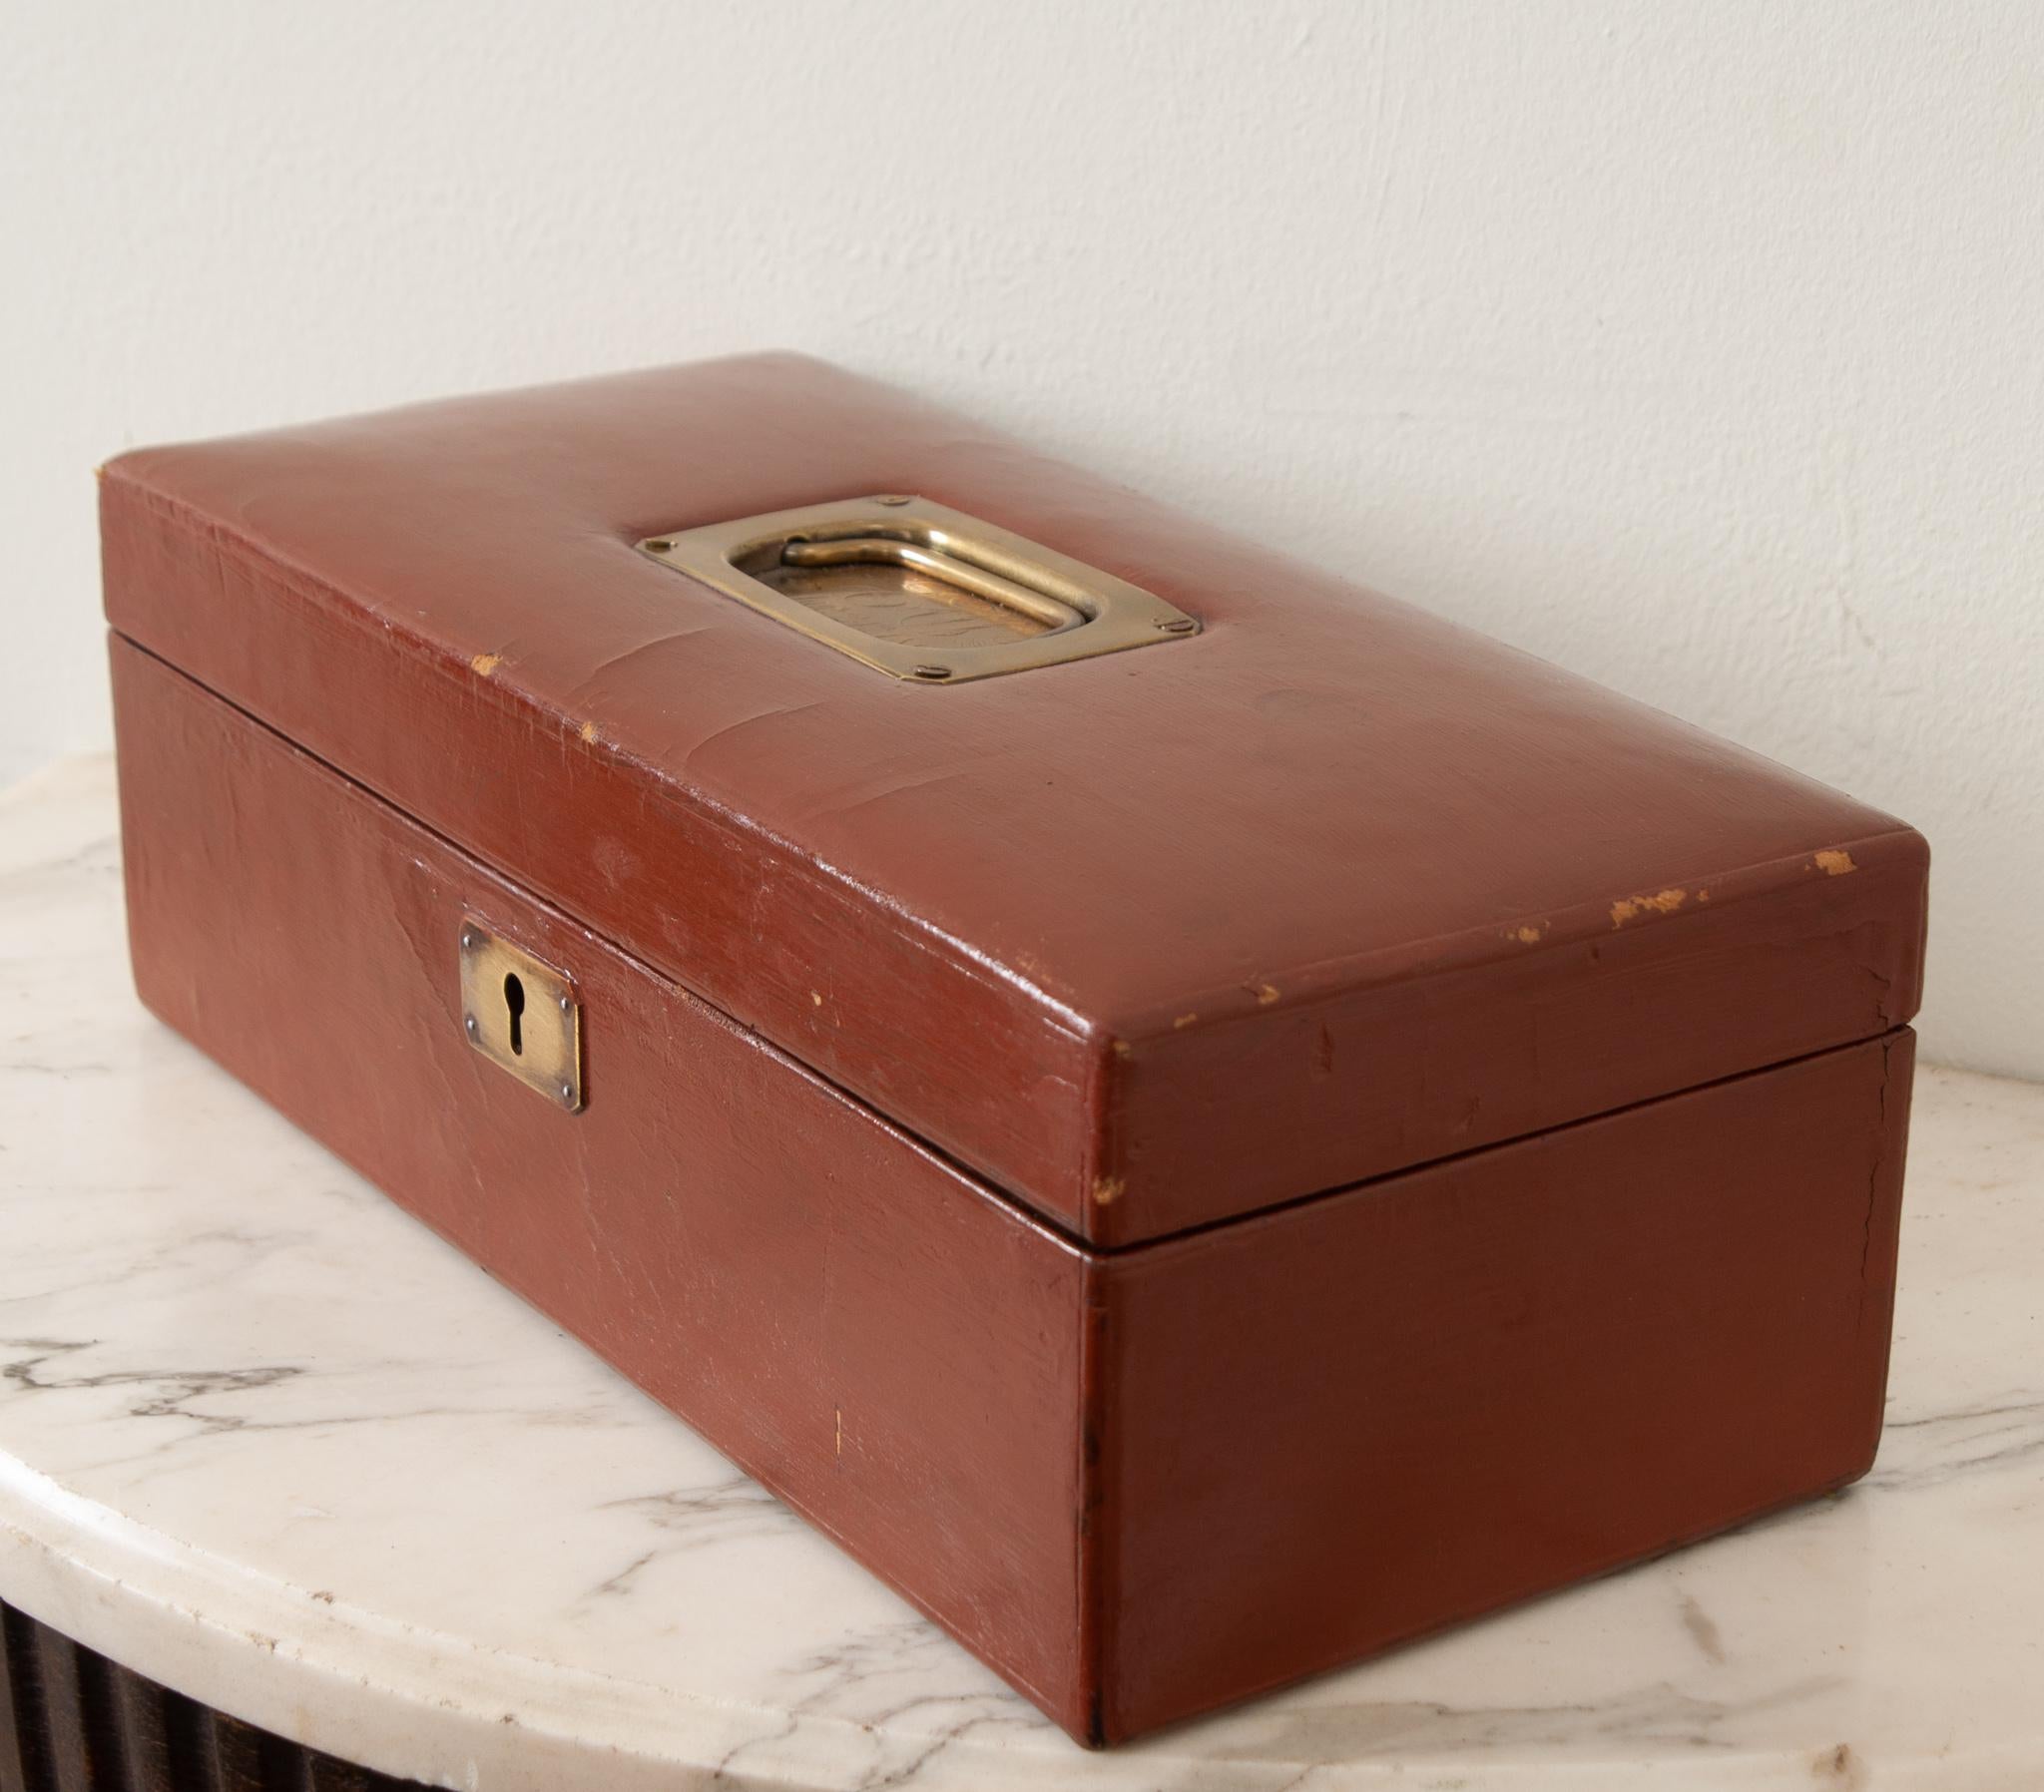 A French painted leather jewelry box with an inset brass handle custom monogrammed “EU, January, 24, 1898”. Inside you’ll find the box is fitted for storing jewelry with two levels of lined storage compartments, all upholstered in a rich red fabric.